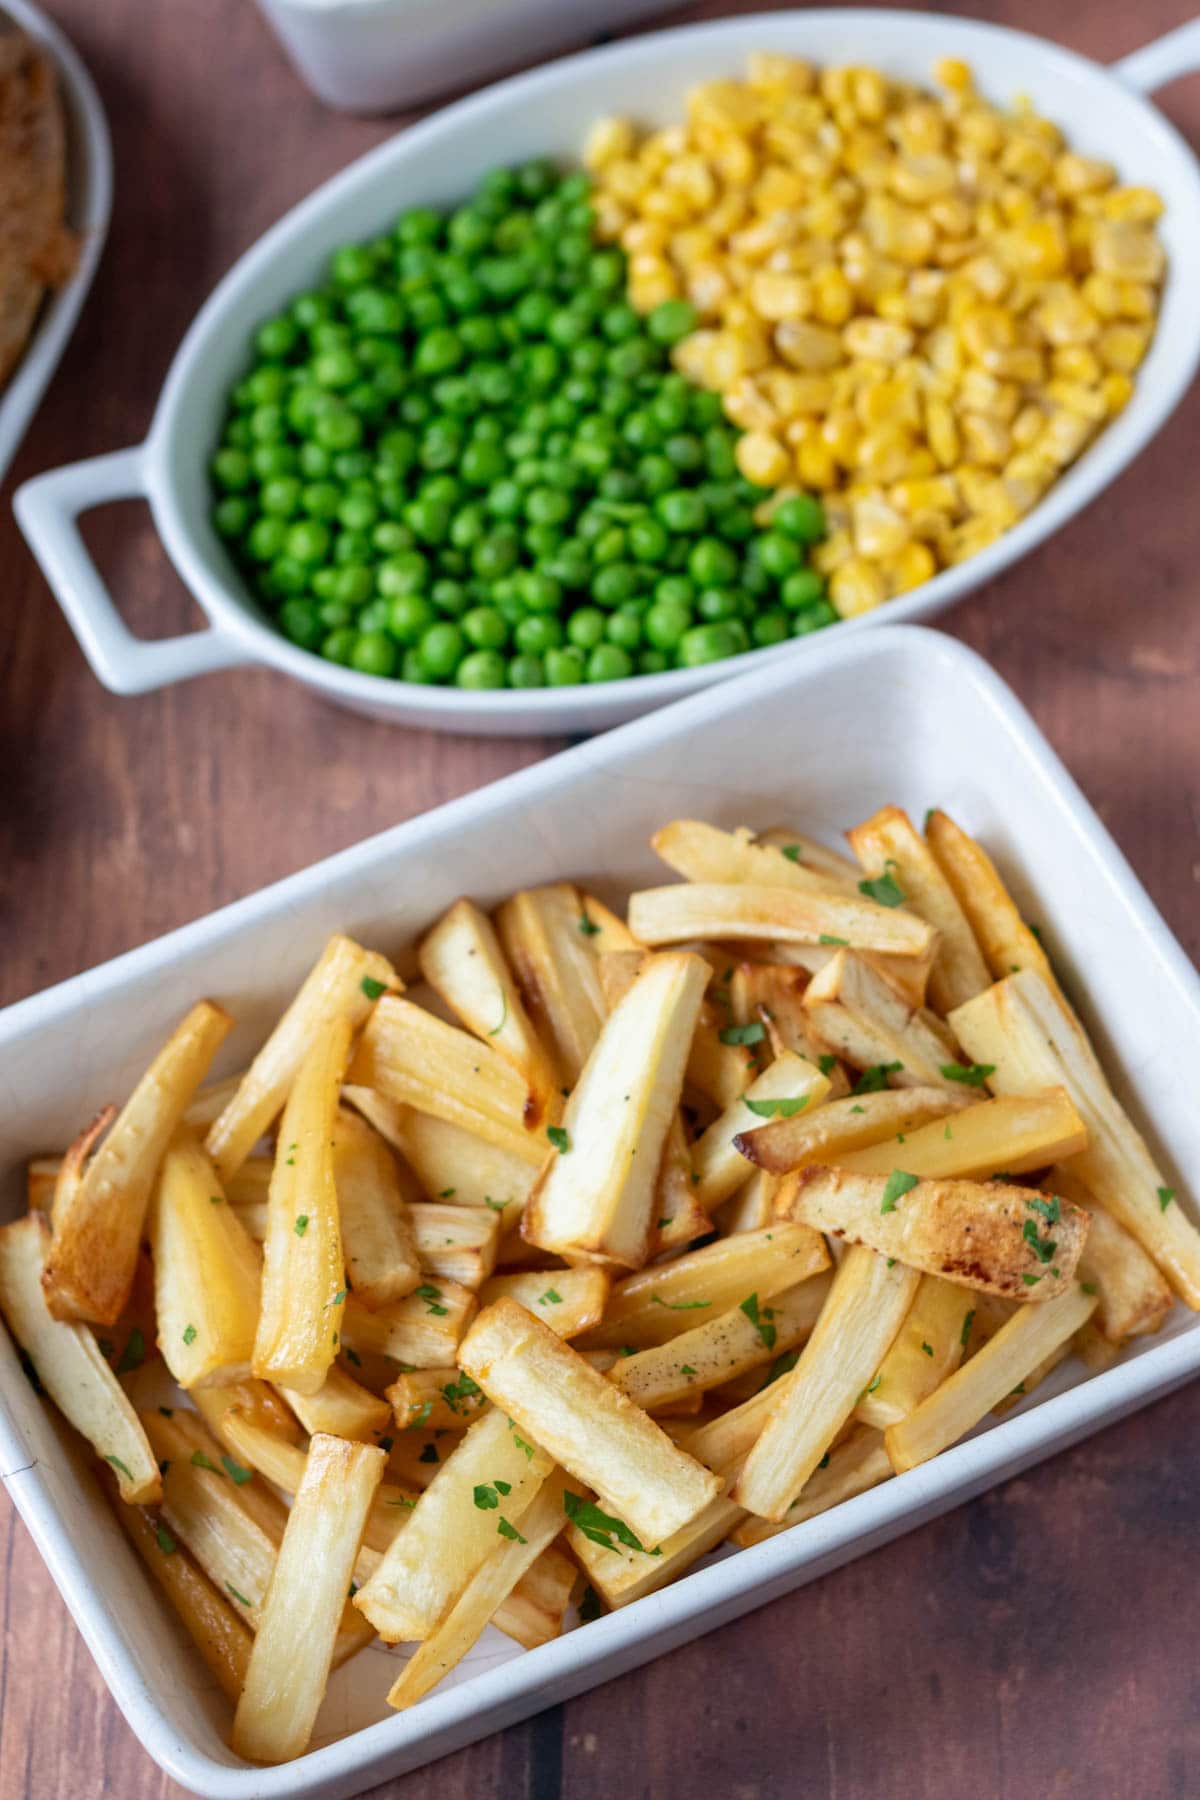 Honey glazed parsnips in a serving dish with a side dish of peas and sweetcorn above.